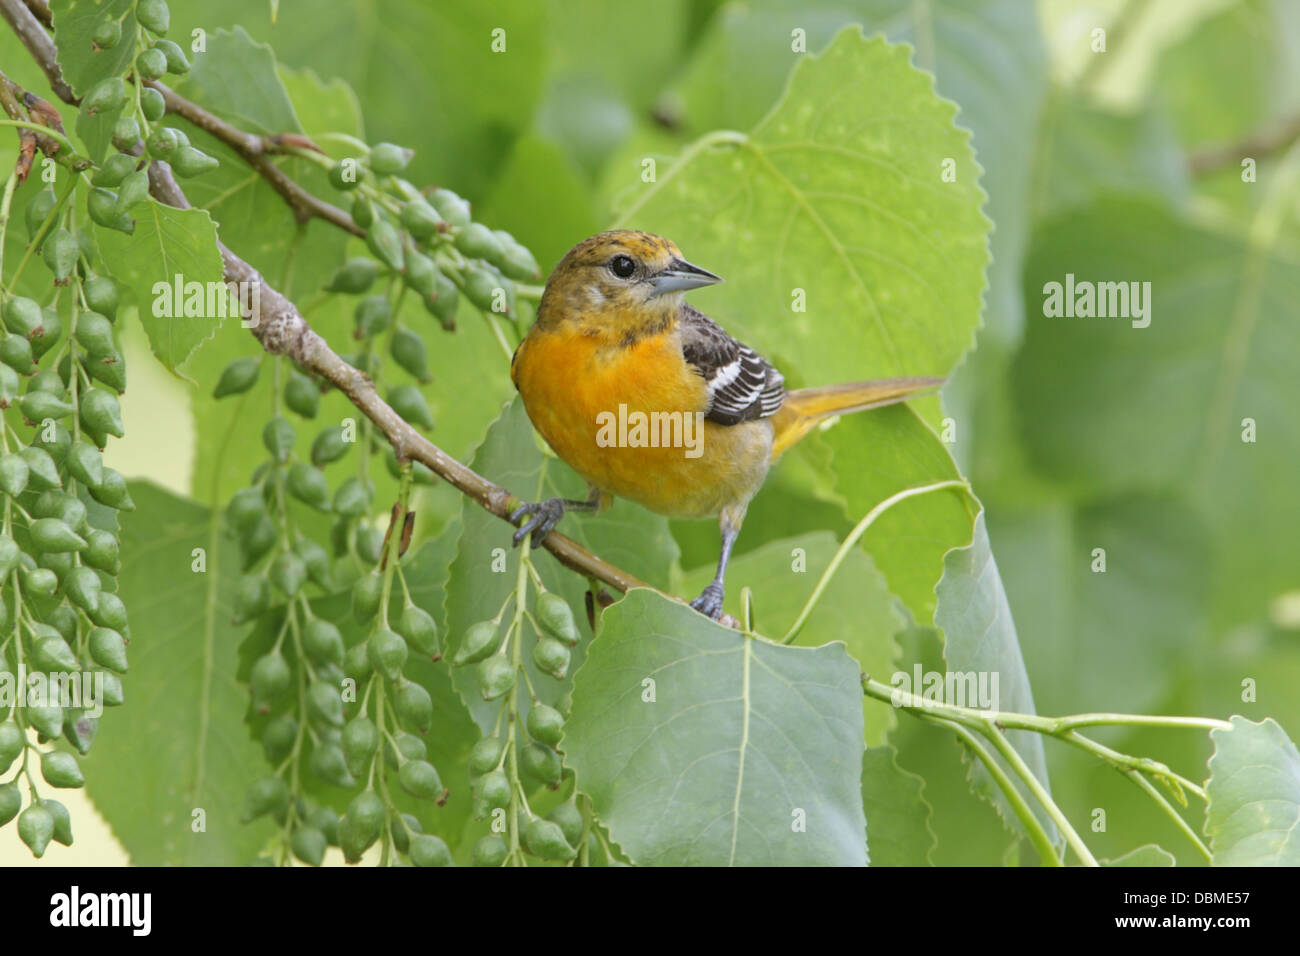 Female Baltimore Oriole perched in Cottonwood Tree perching bird songbird Ornithology Science Nature Wildlife Environment Stock Photo